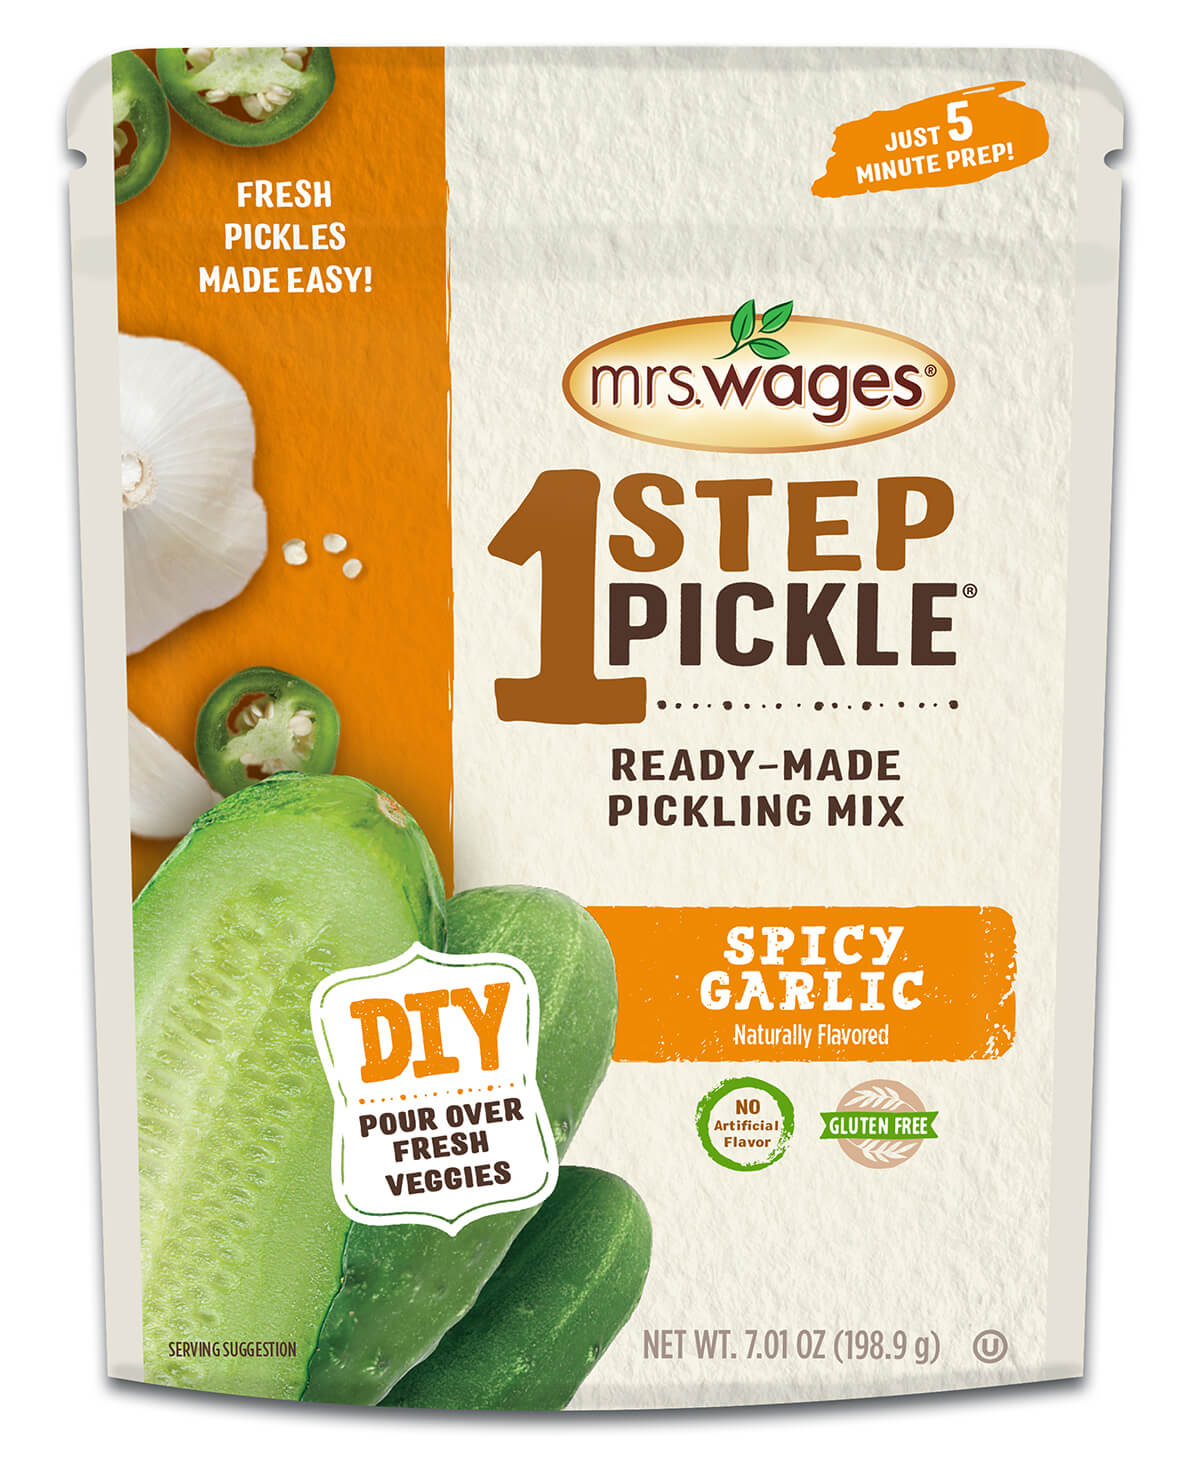 Mrs. Wages® 1 Step Pickle® Spicy Garlic Ready-Made Pickling Mix – Naturally Flavored